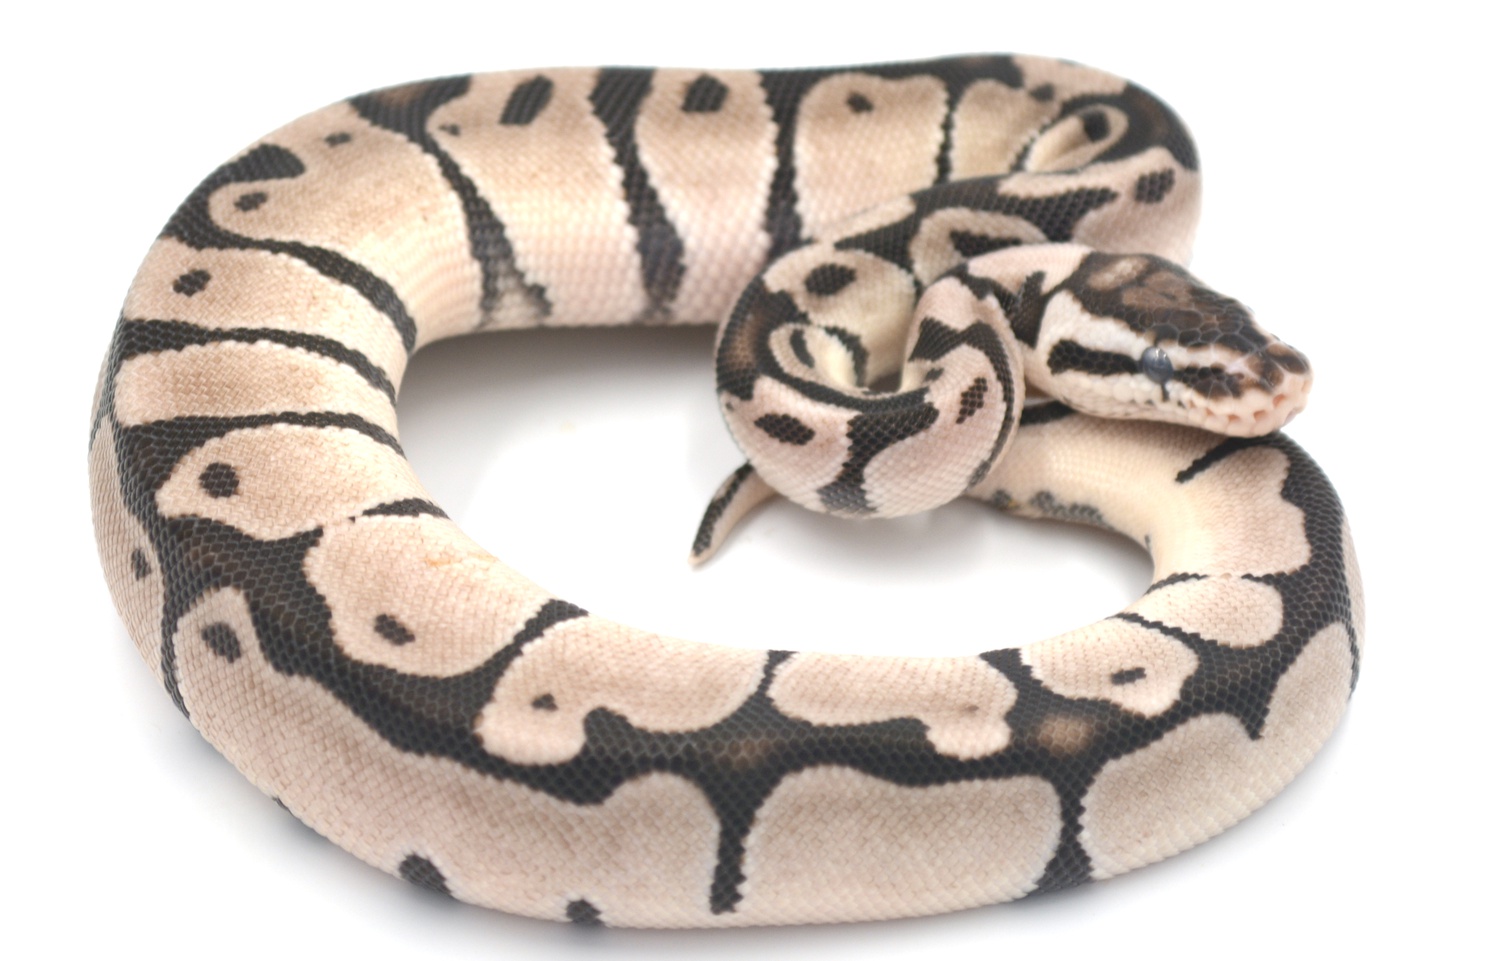 Pastel Vpi Axanthic Ball Python by Wreck room snakes